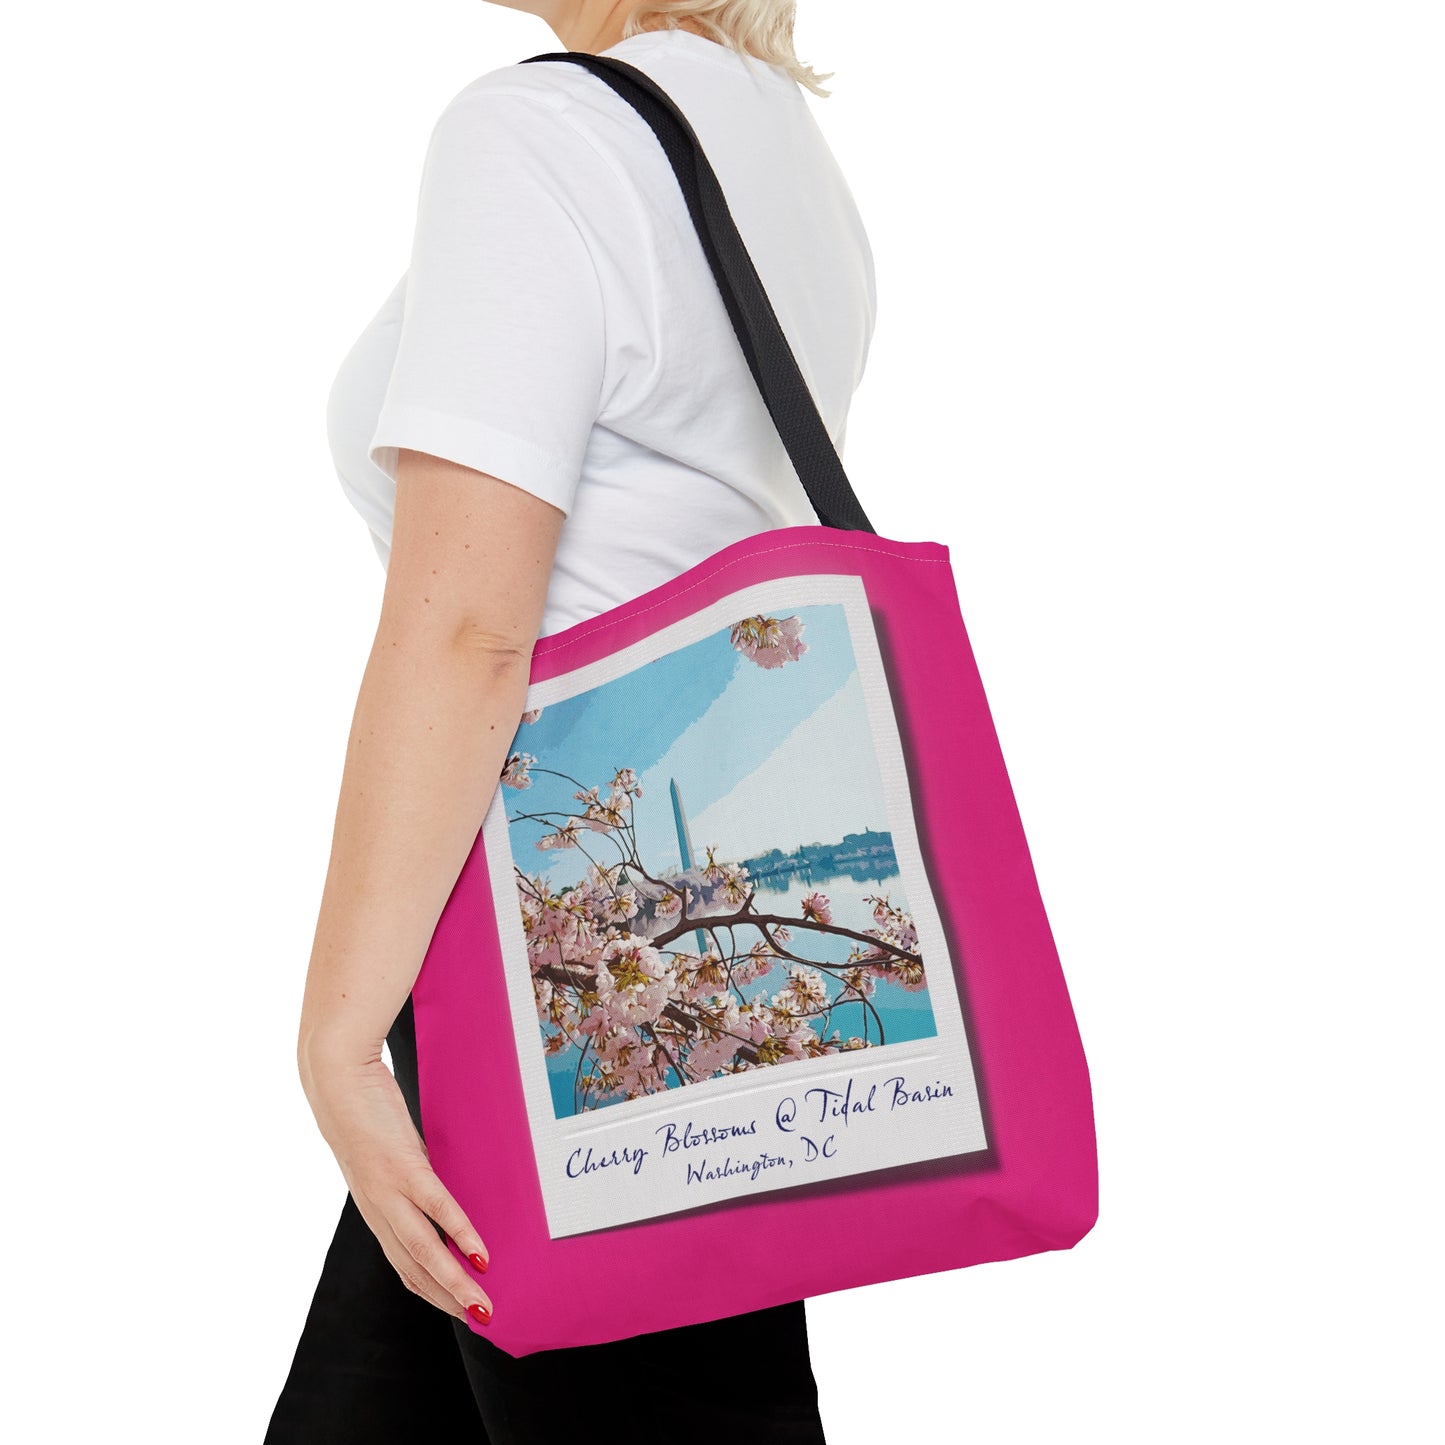 Instant Photo - Tidal Basin Cherry Trees - Mean Girls Lipstick ff00a8 - Tote Bag